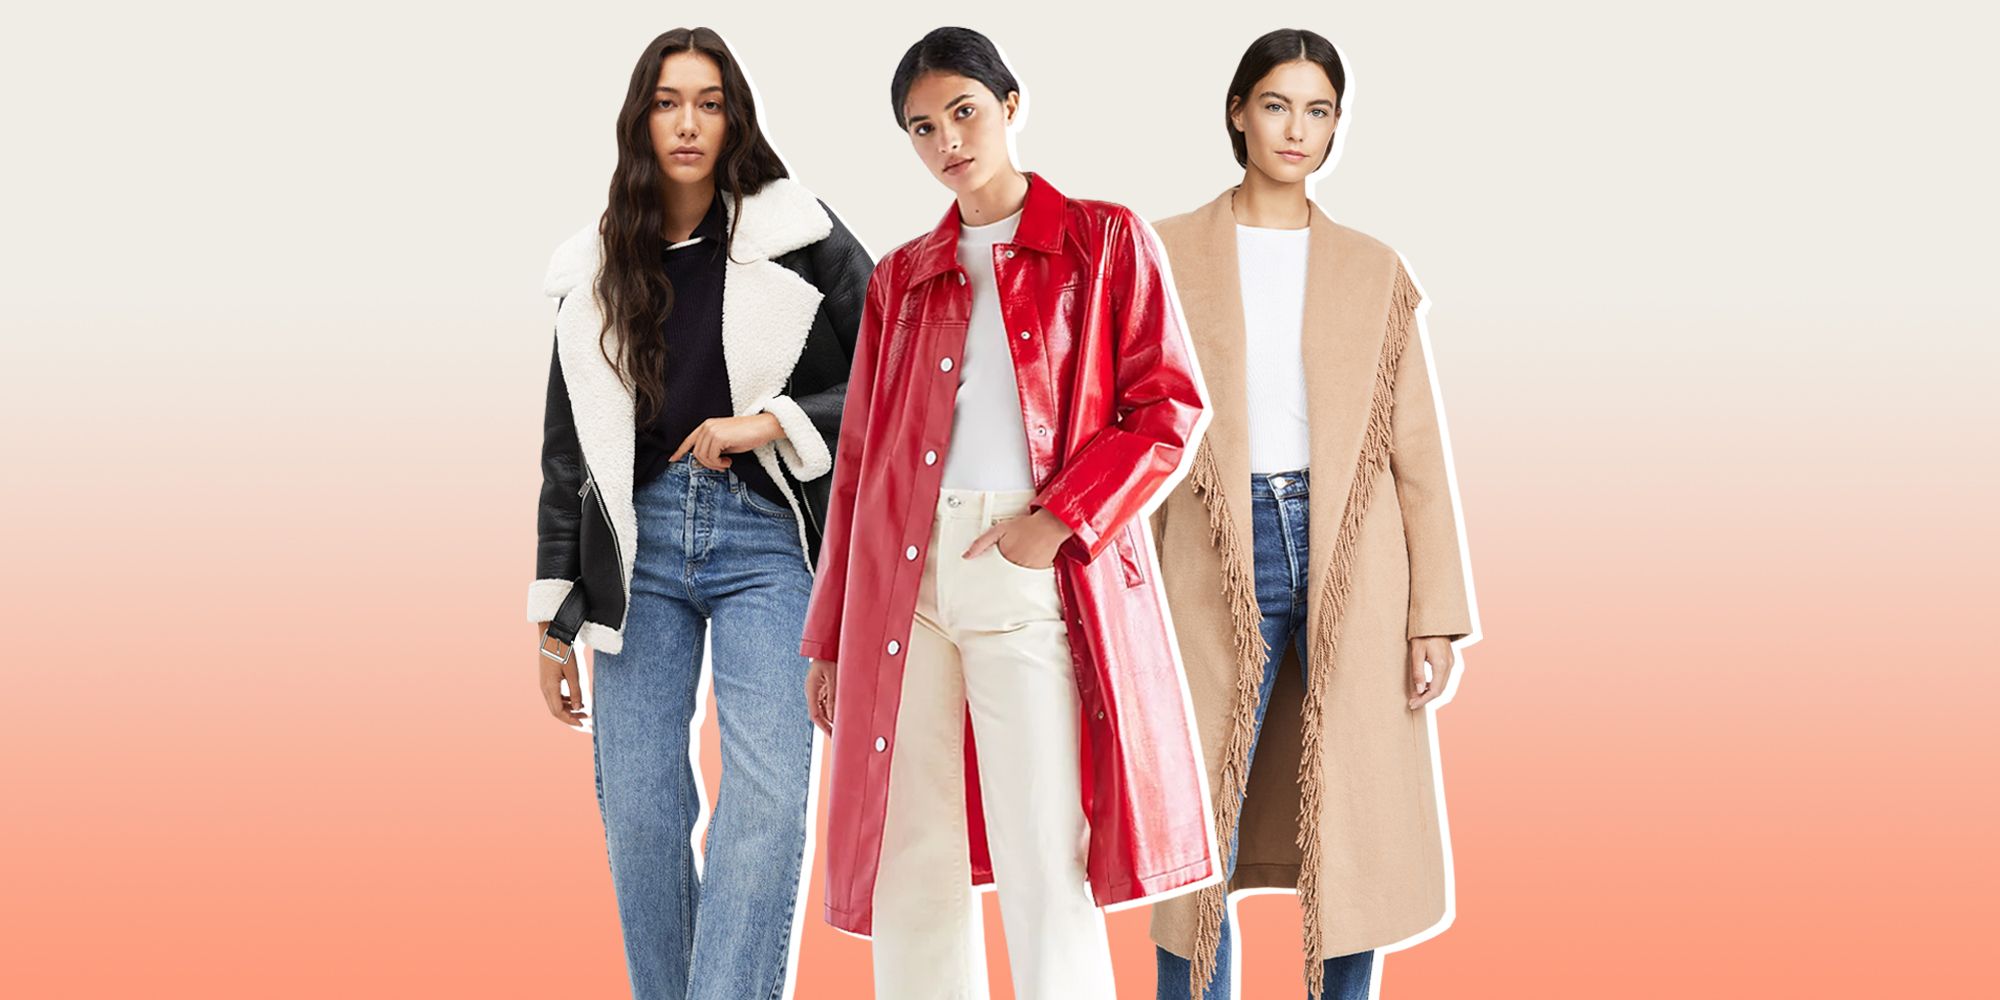 25 Stylish Fall Coats for Women 2021 - Cute and Trendy Fall Jackets